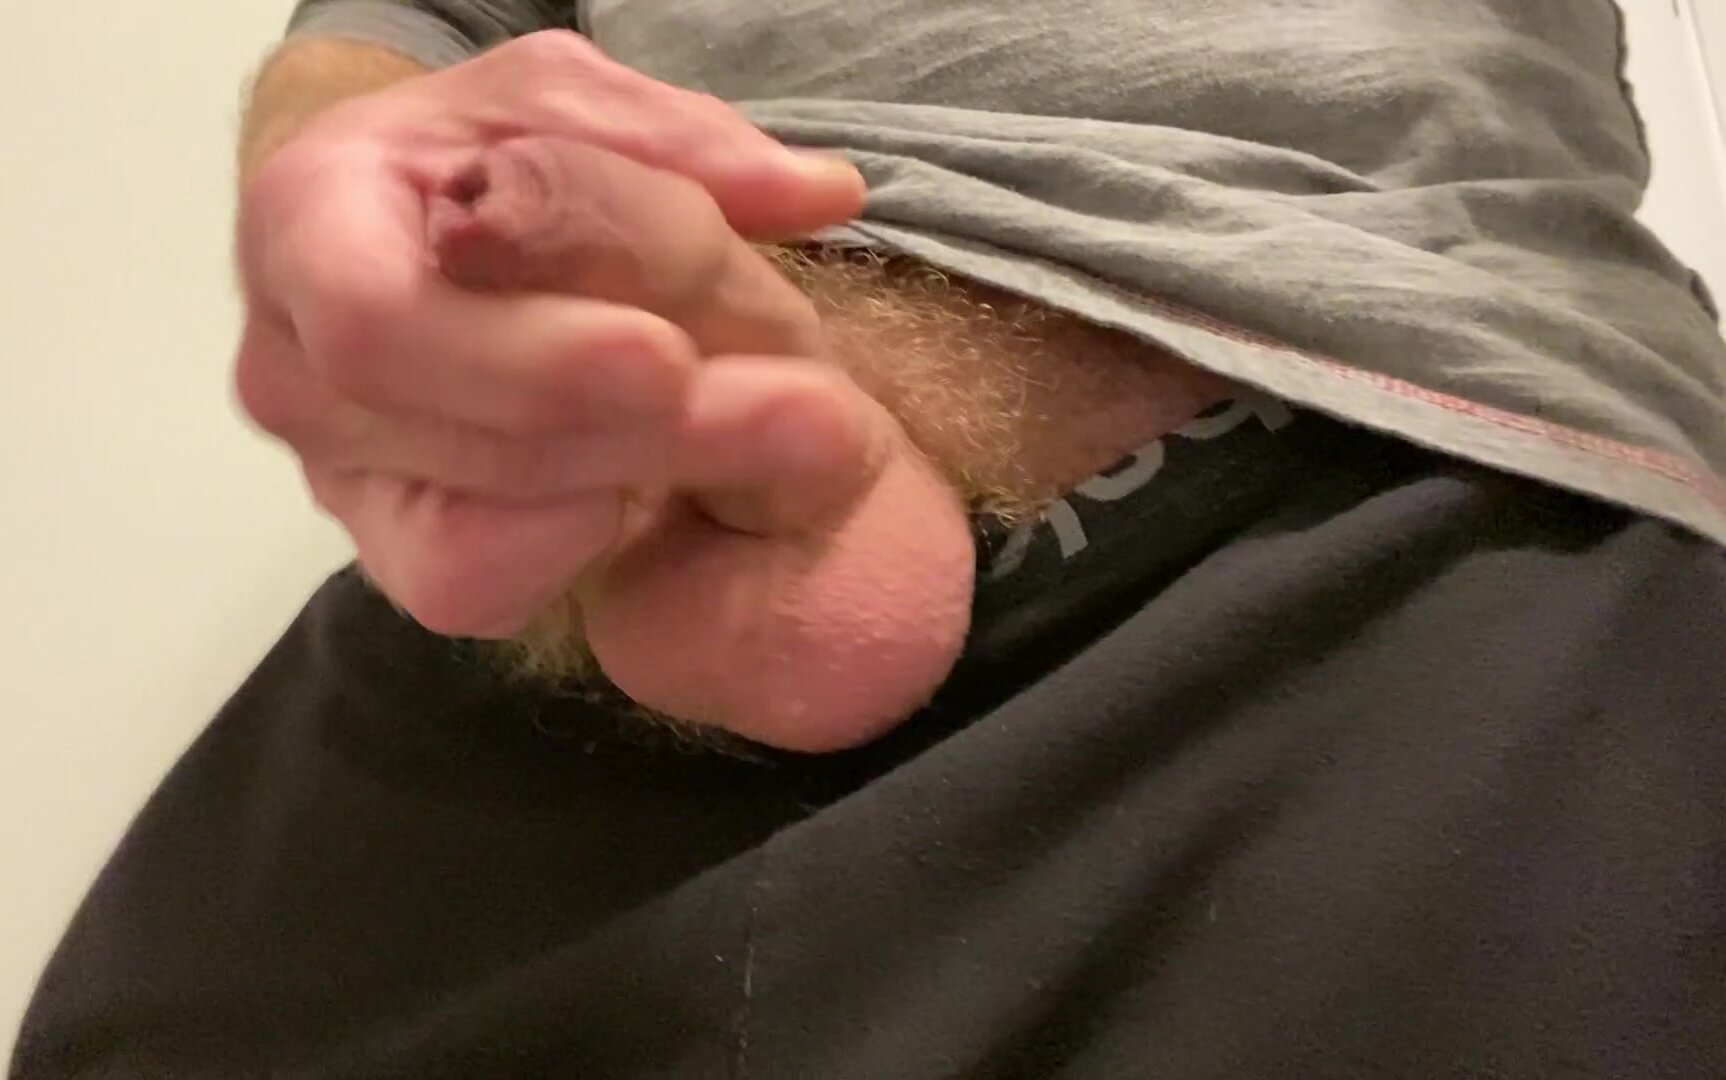 furry ginger aussie bloke pulls cock out of trackies